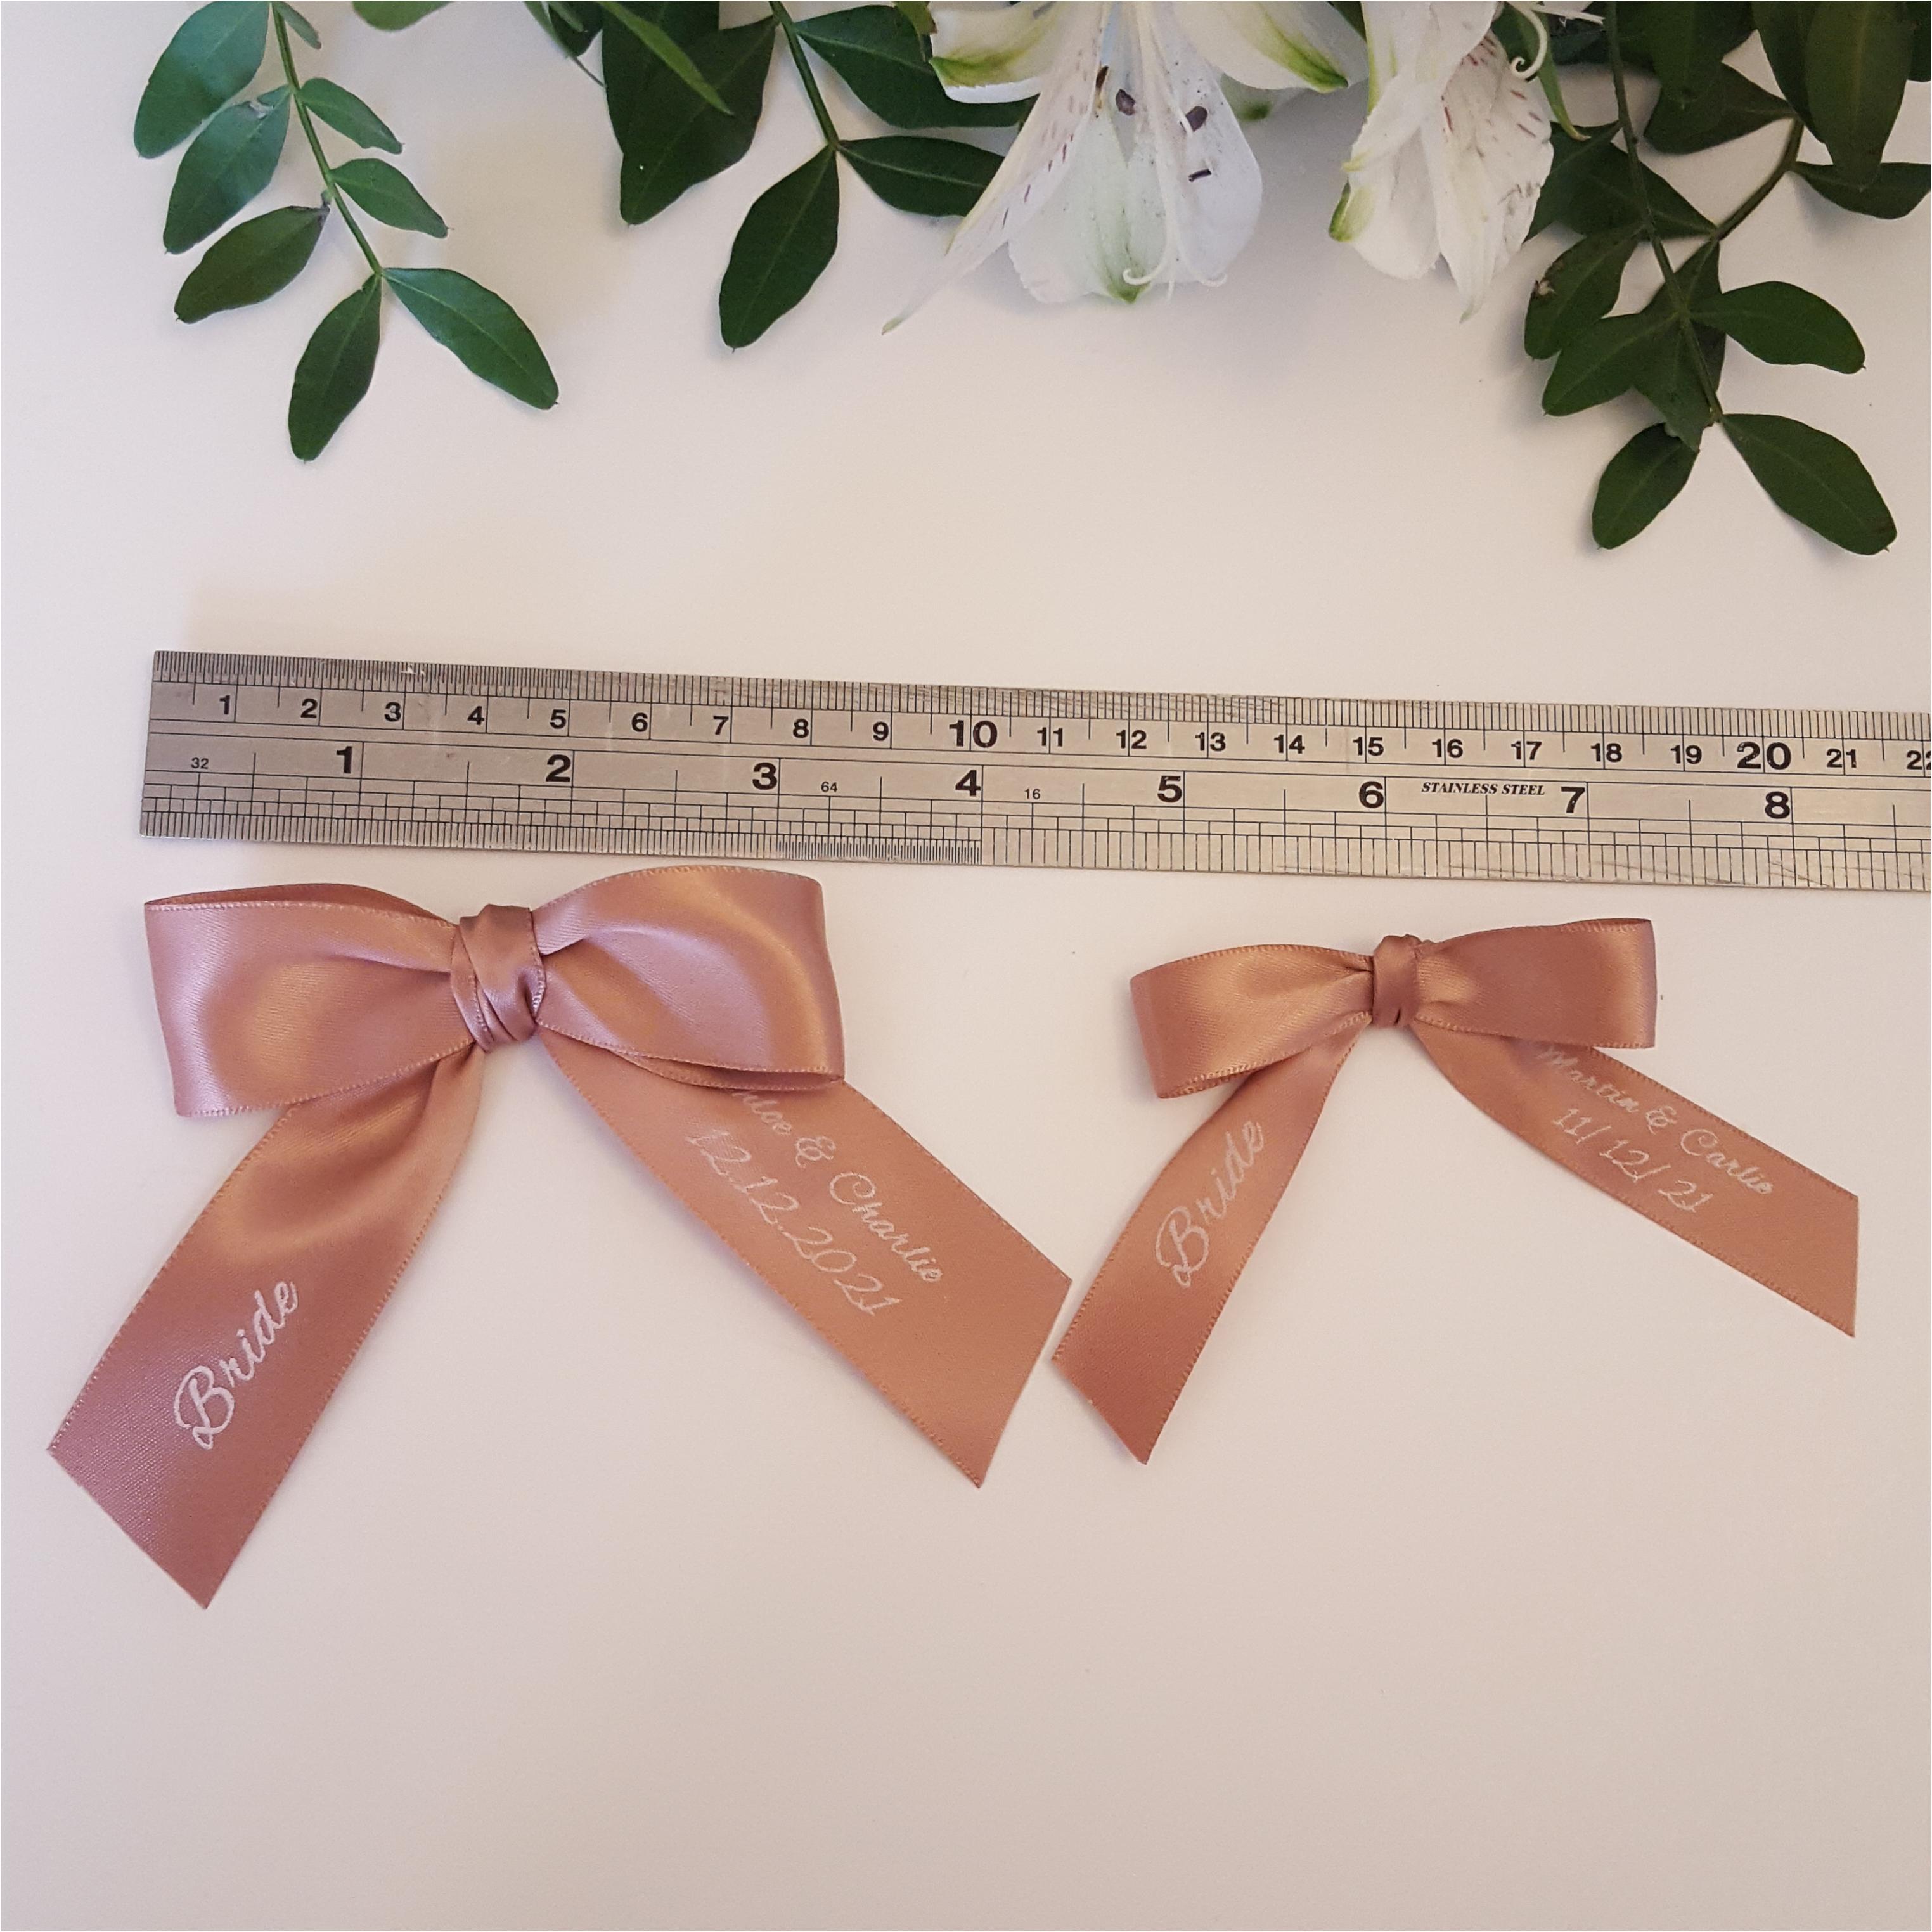 Rose gold bows with guest names